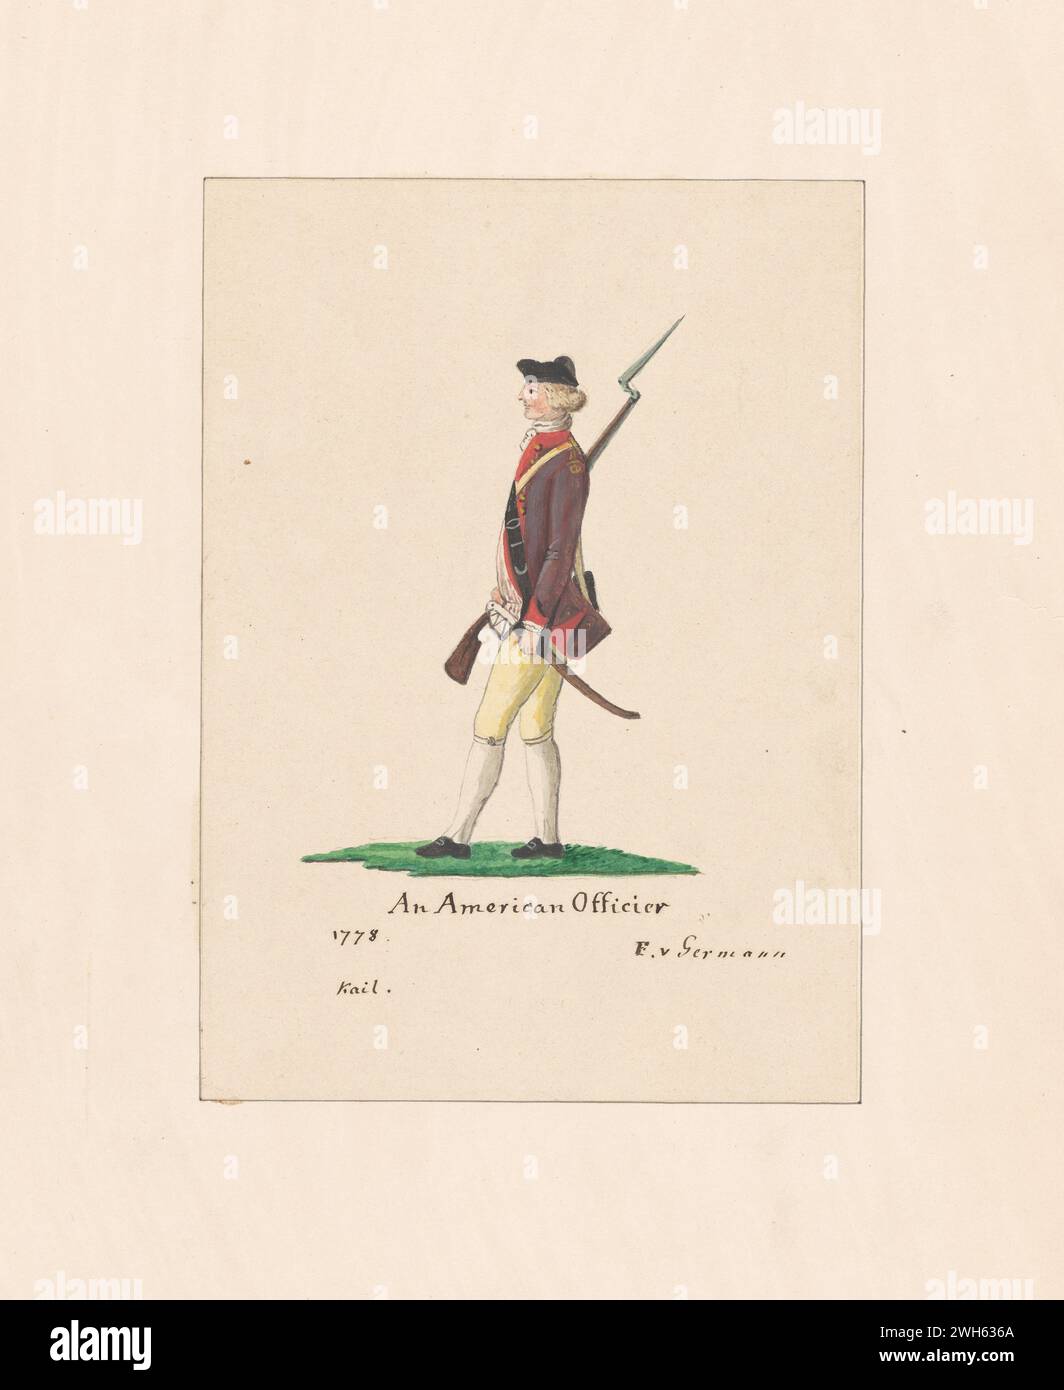 “Watercolor of an American Officer during the American Revolutionary War” circa 1778. From a series of prints by Friedrich von German captain of a regiment from Hesse-Hanau, one of the many German auxiliary troops hired by George III to fight in the American Revolution. He arrived in North America in 1775 During the war, he painted a series of watercolors of American, British, and German soldiers. Stock Photo